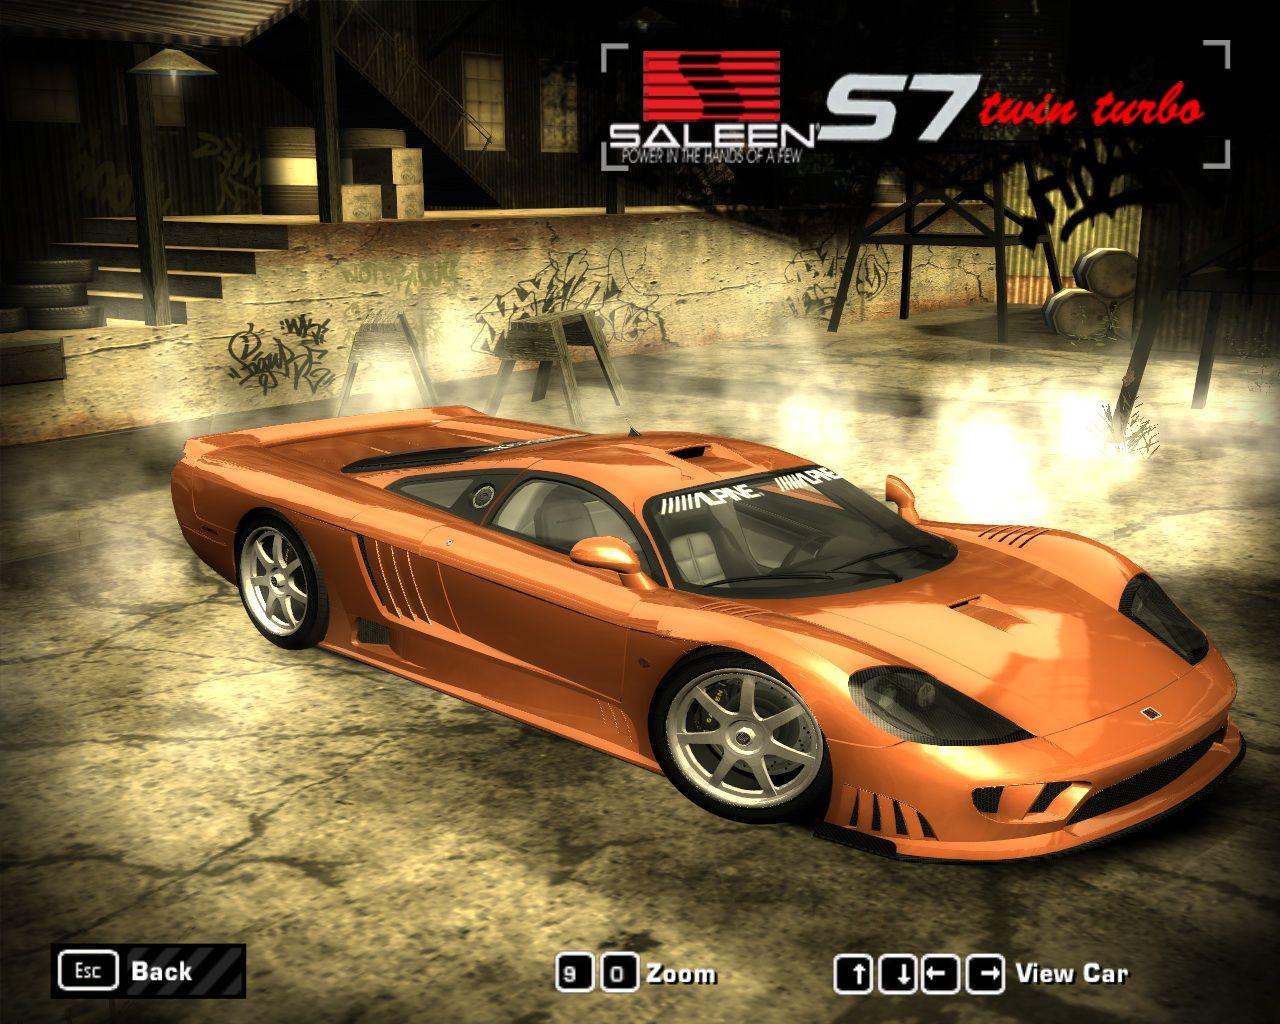 Saleen S7 Logo - Need For Speed Most Wanted Saleen S7 Twin Turbo (Juiced 2) | NFSCars